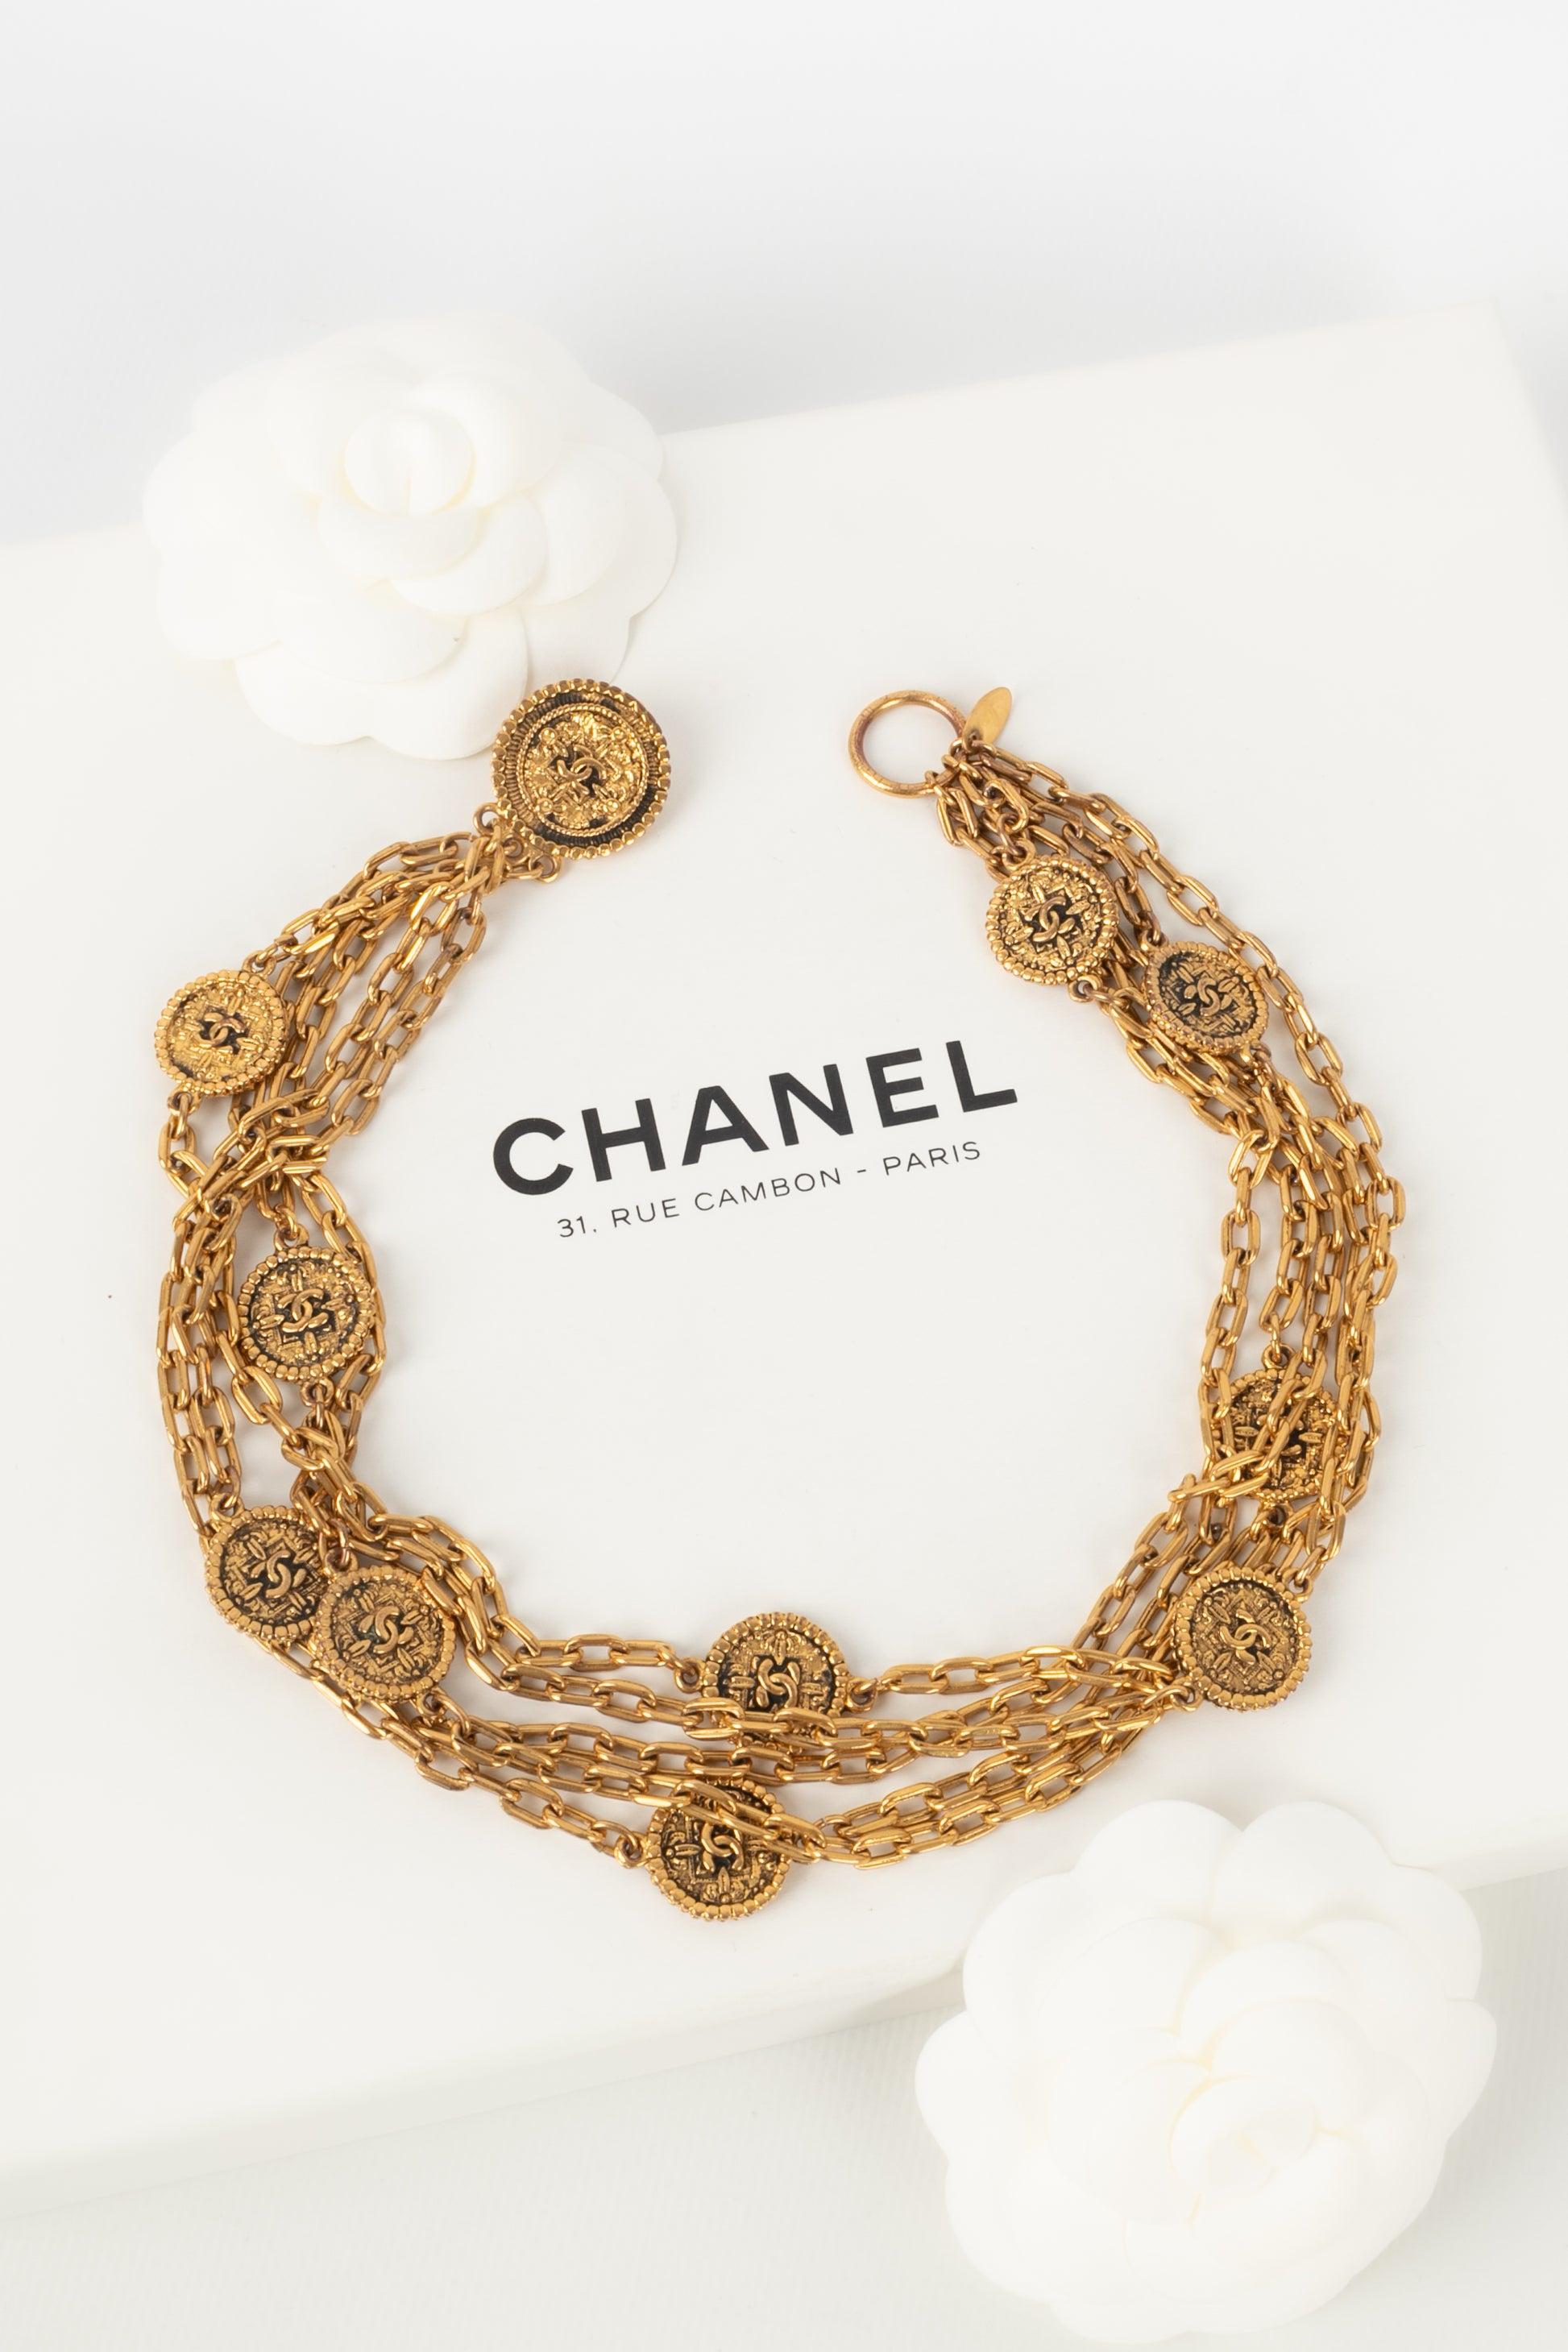 Chanel - (Made in France) Multi-row short necklace with golden metal chains and medallions.

Additional information:
Condition: Very good condition
Dimensions: Length: 40 cm

Seller Reference: CB190
